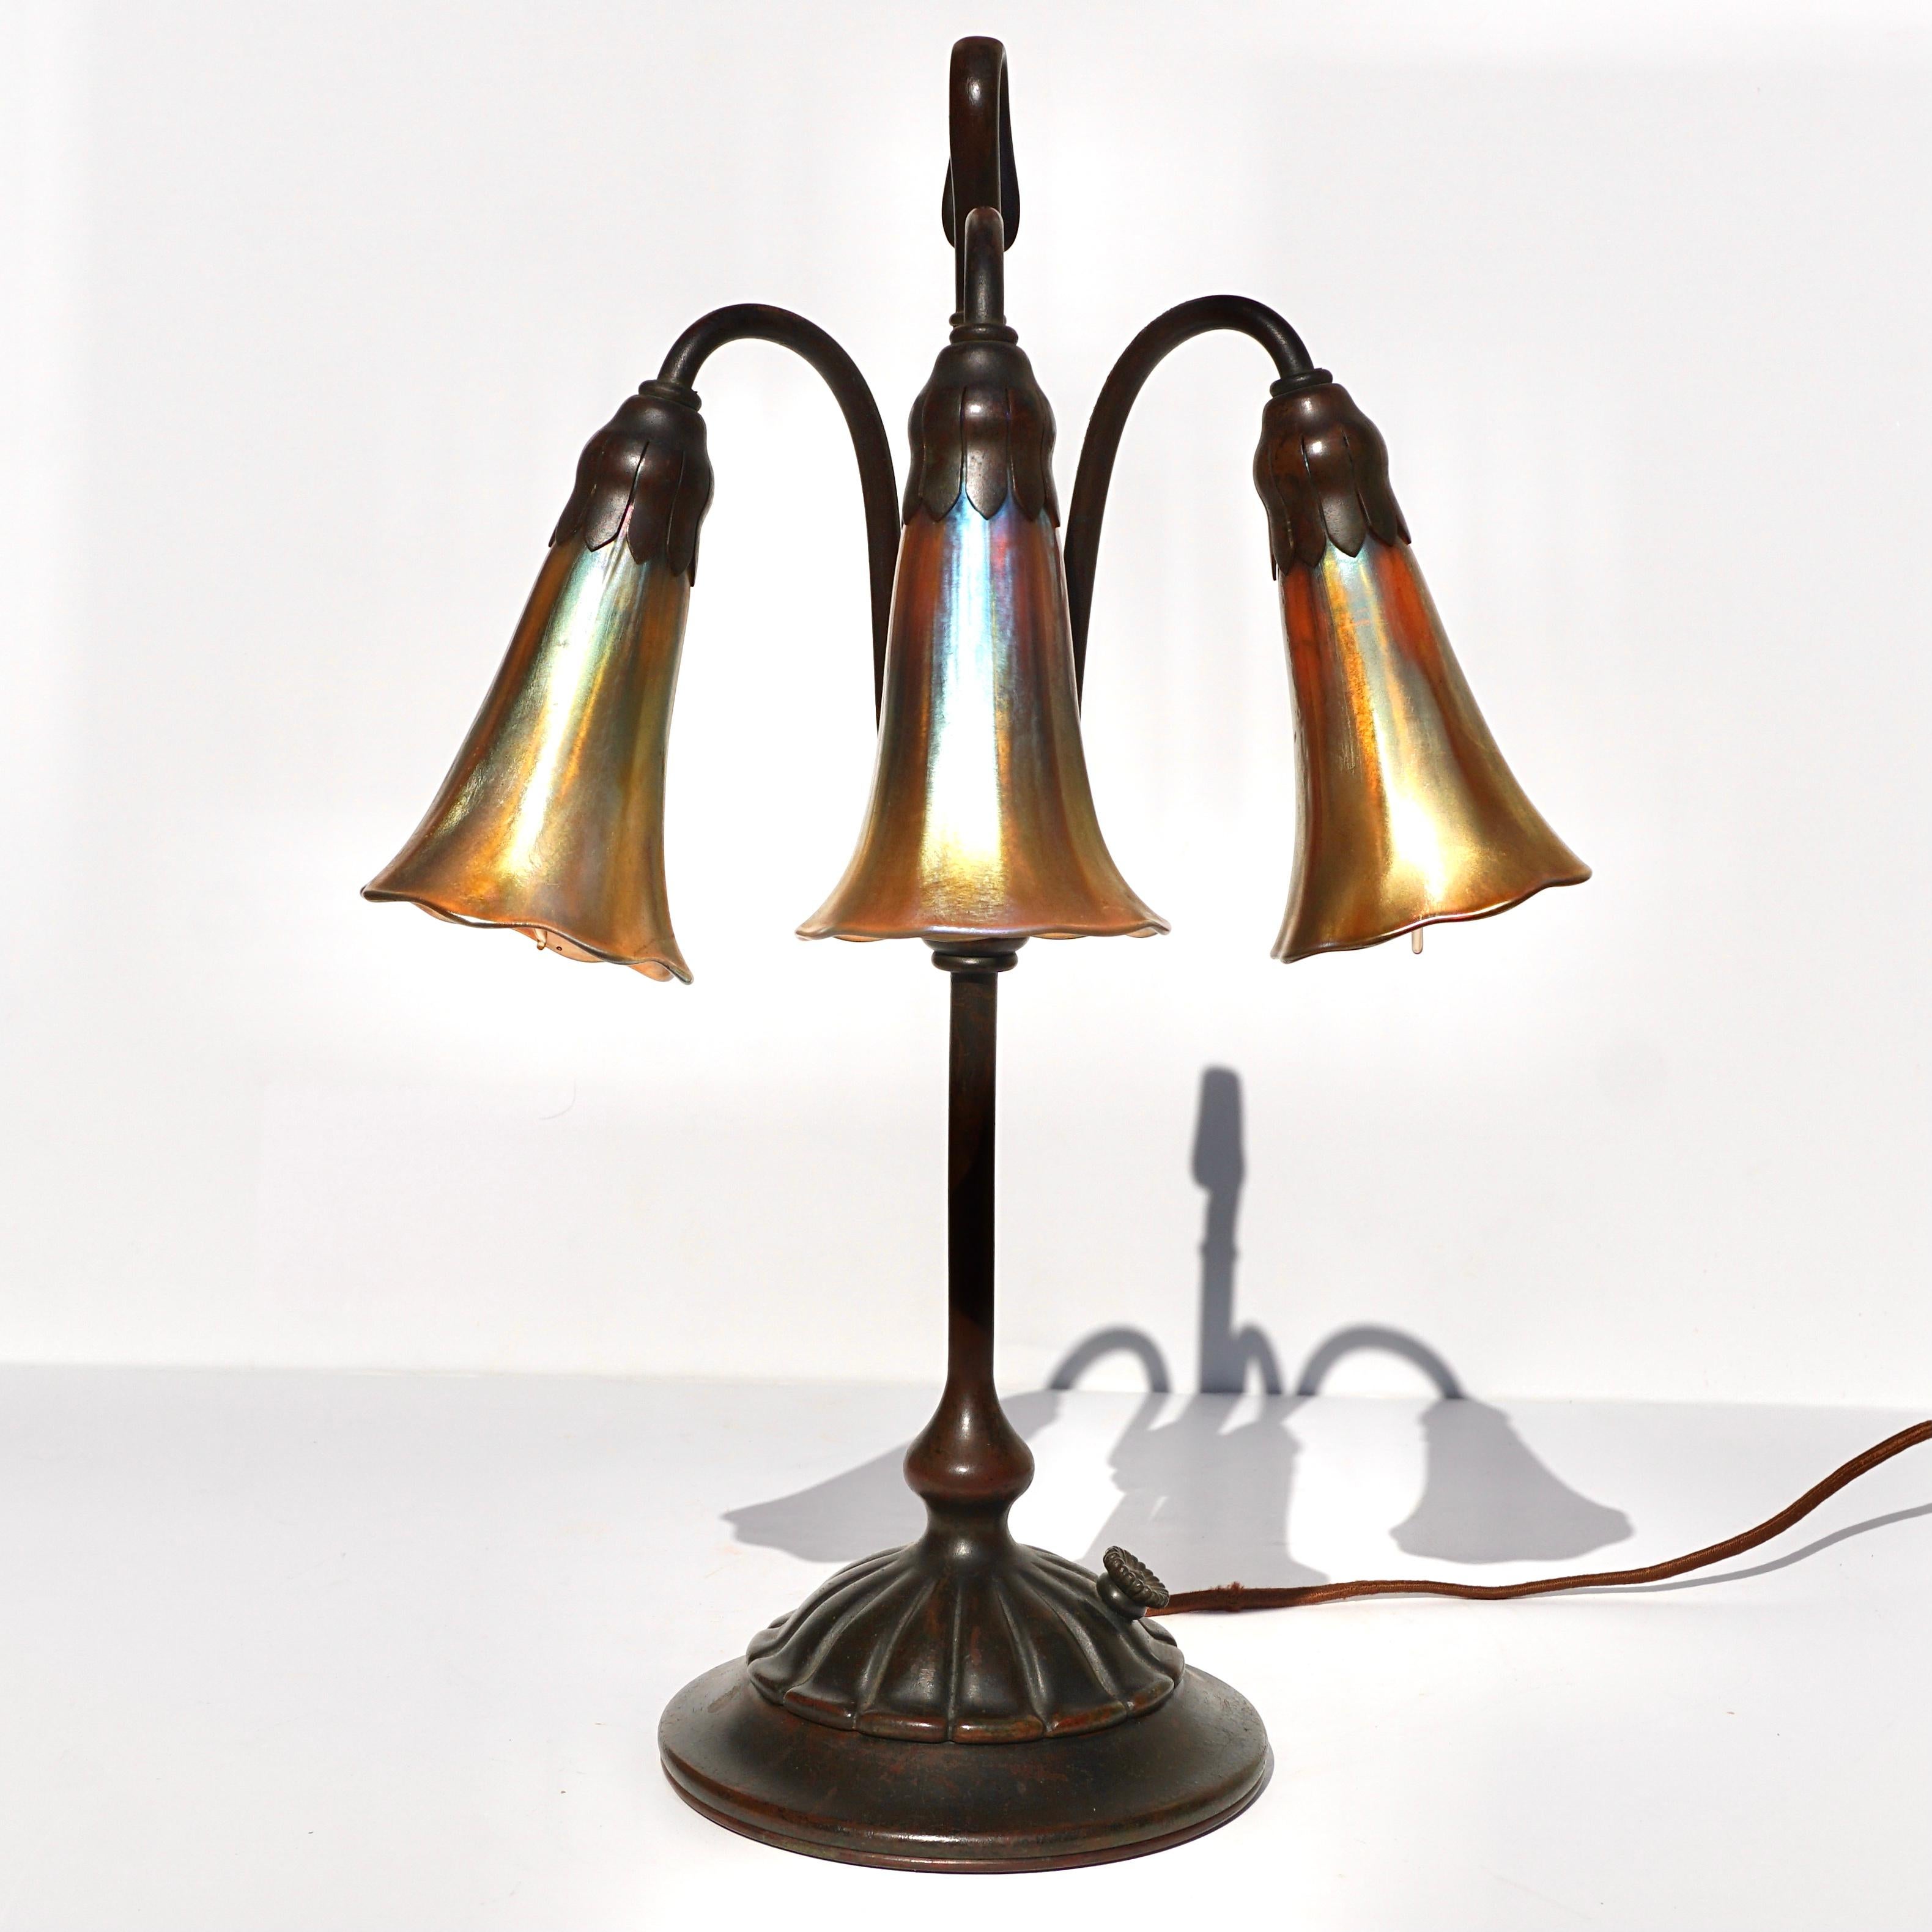 Tiffany Studios New York bronze and favrile lily shade table lamp.
Table lamp model 